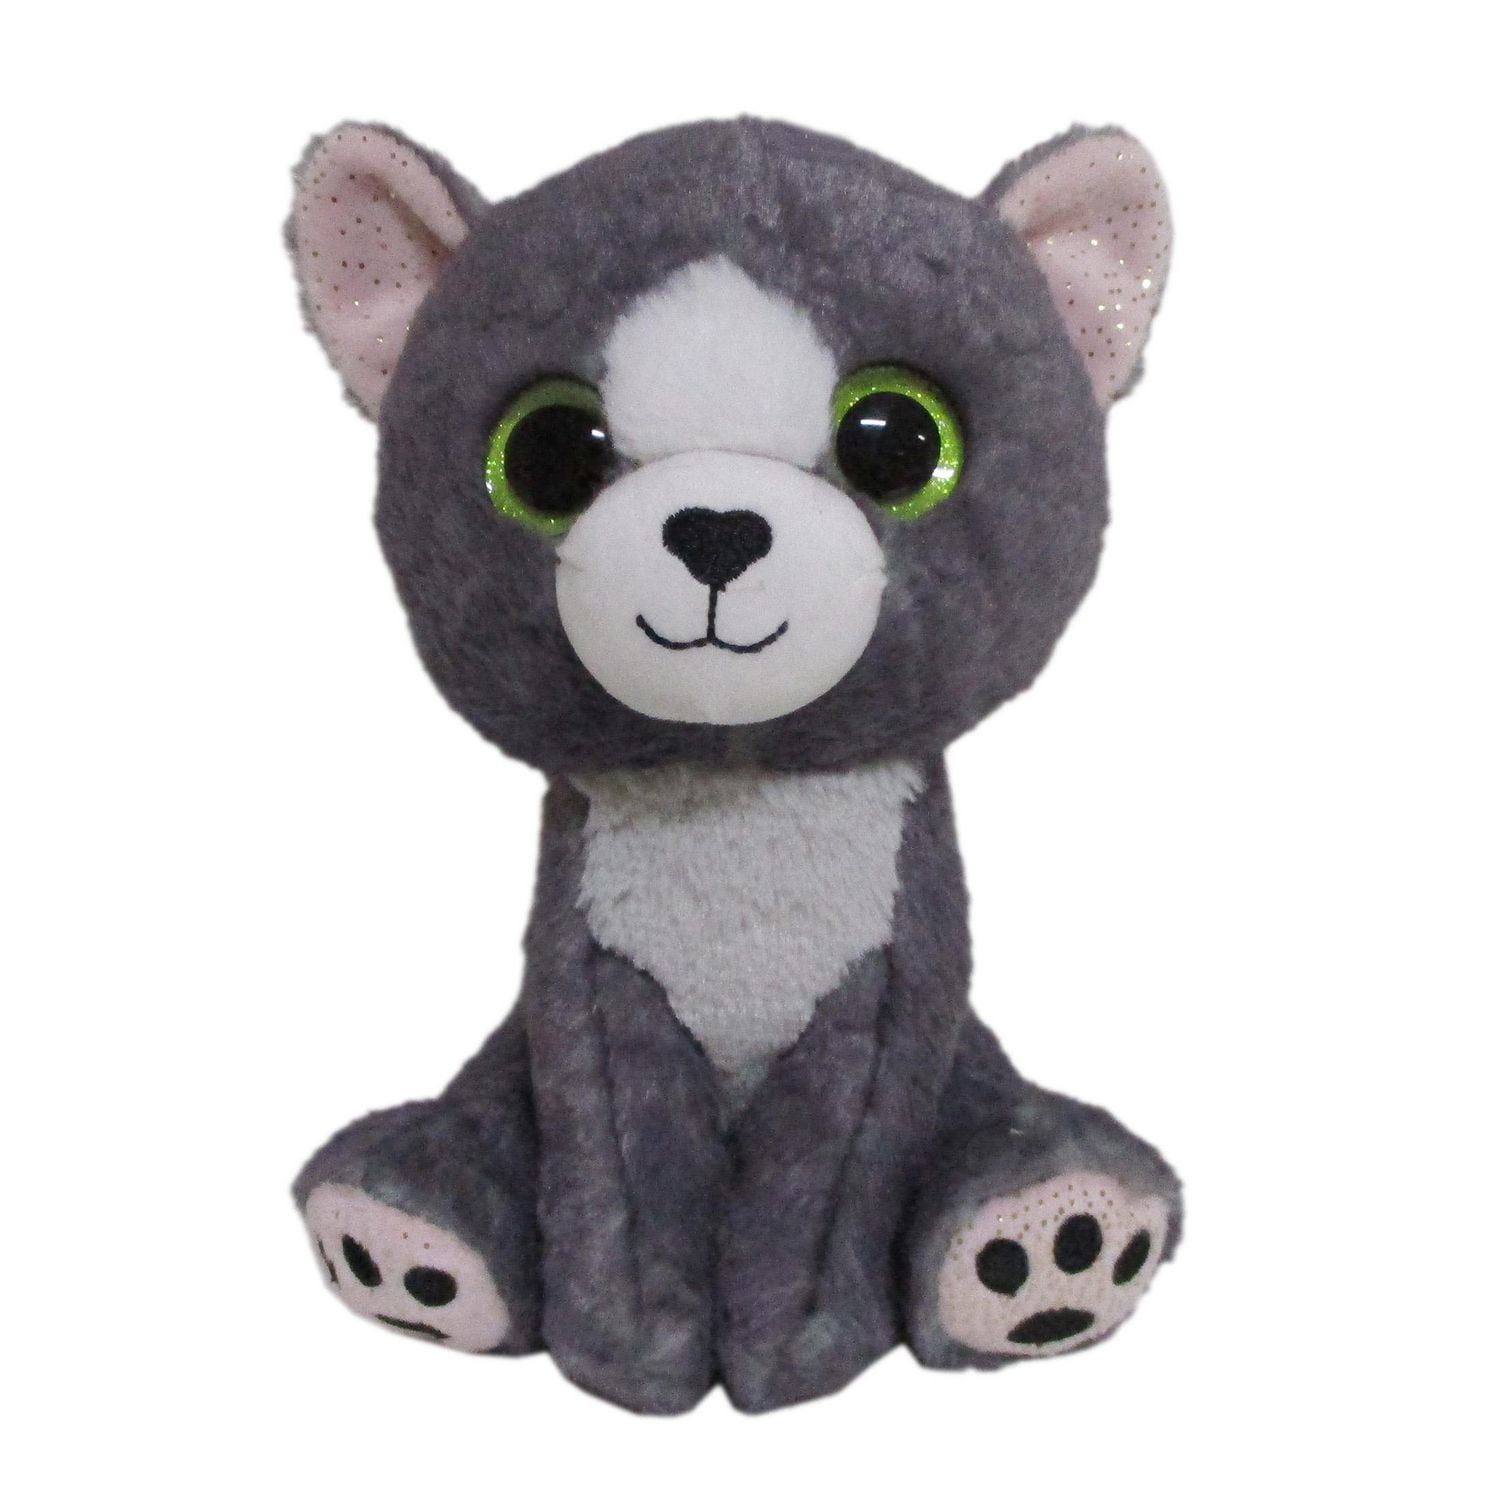 Stuffed Cat Stuffed Animal Cute Plush Toy Cat Kawaii Plushie Buddy the Gray  and White Cuddly Snuggly Faux Fur Kitty Cat Small , Md, Large -  Canada